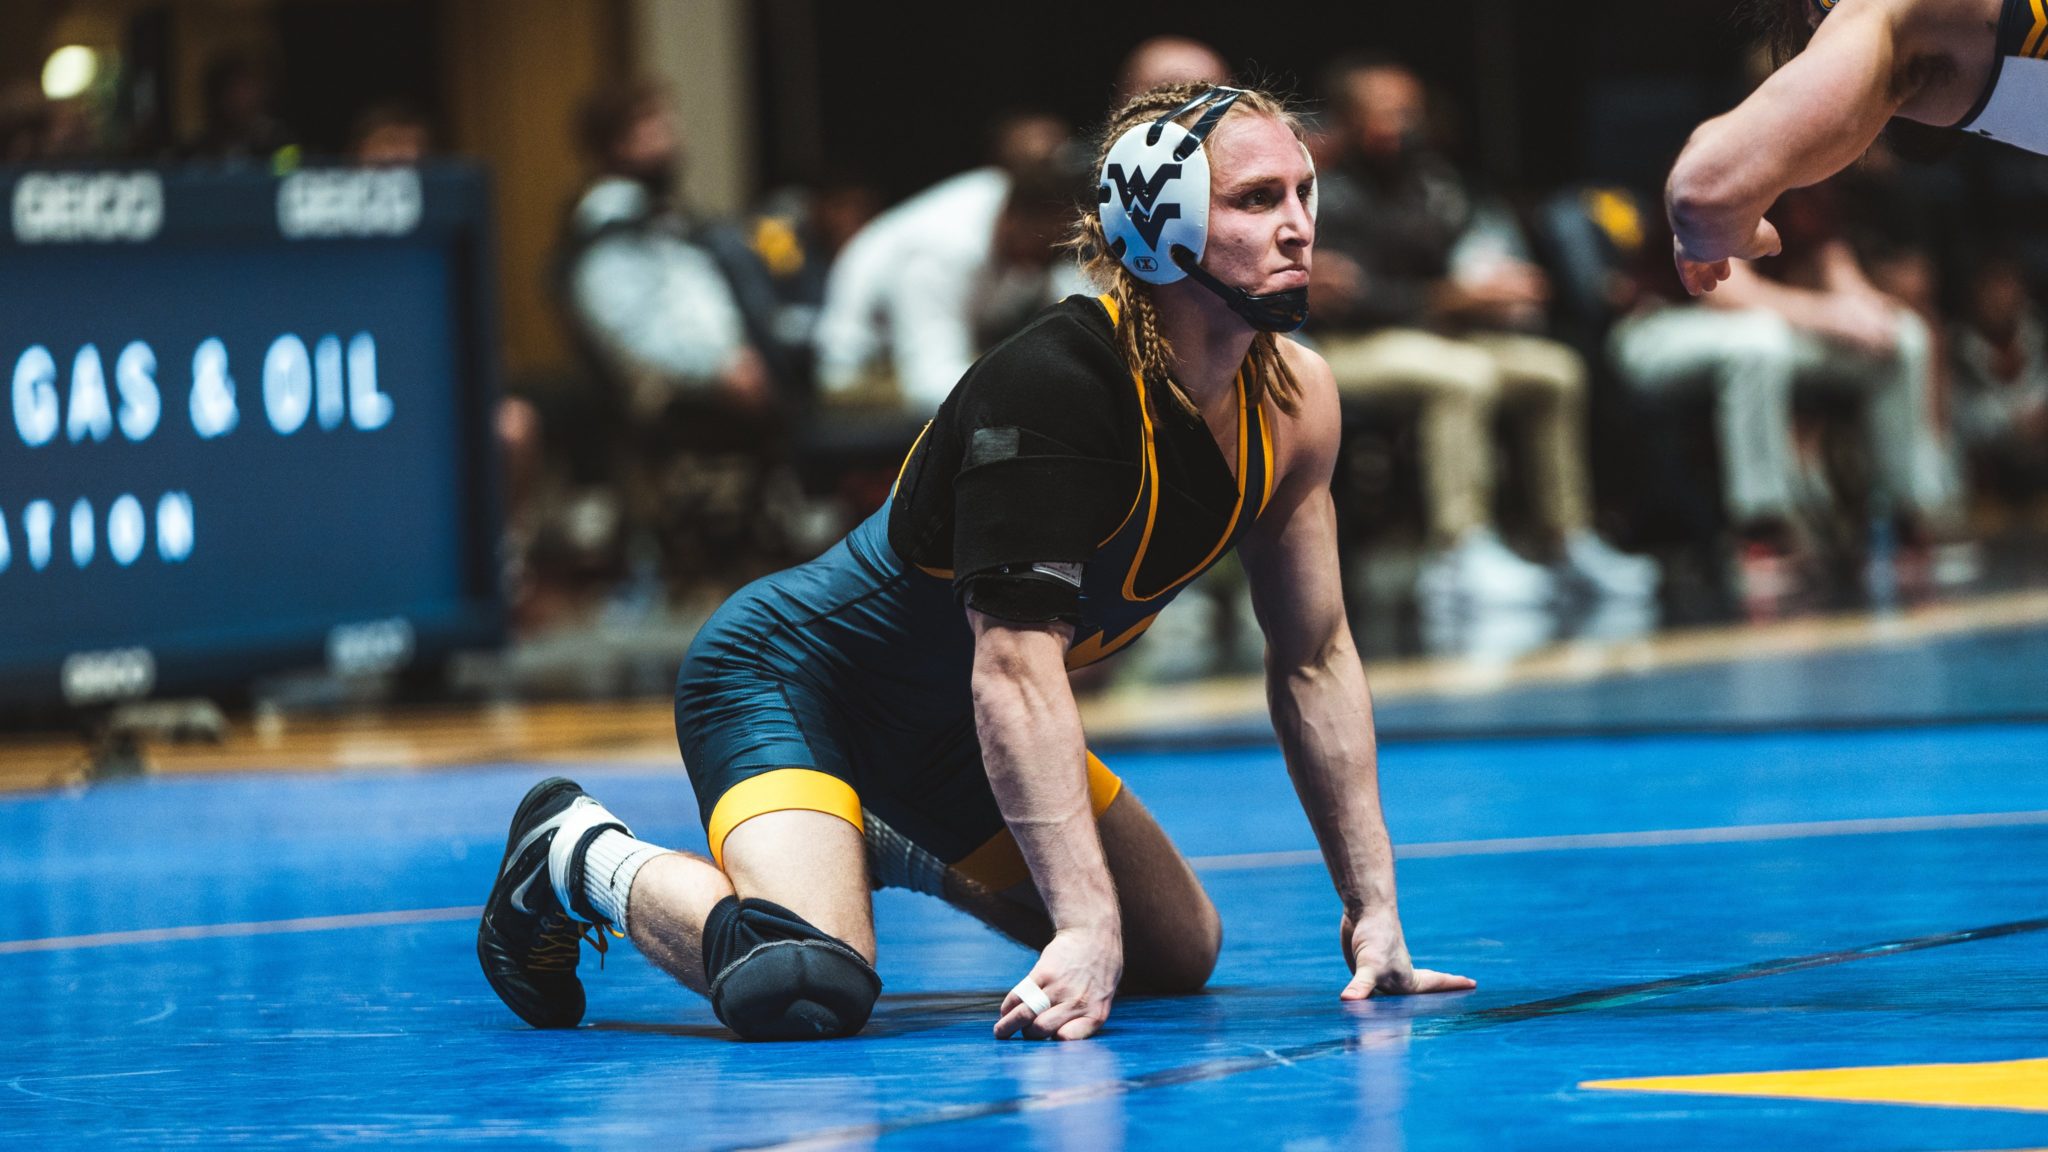 WVU Wrestler Killian Cardinale Earns All American Status At NCAA Championships, Takes Seventh. WV Sports Now